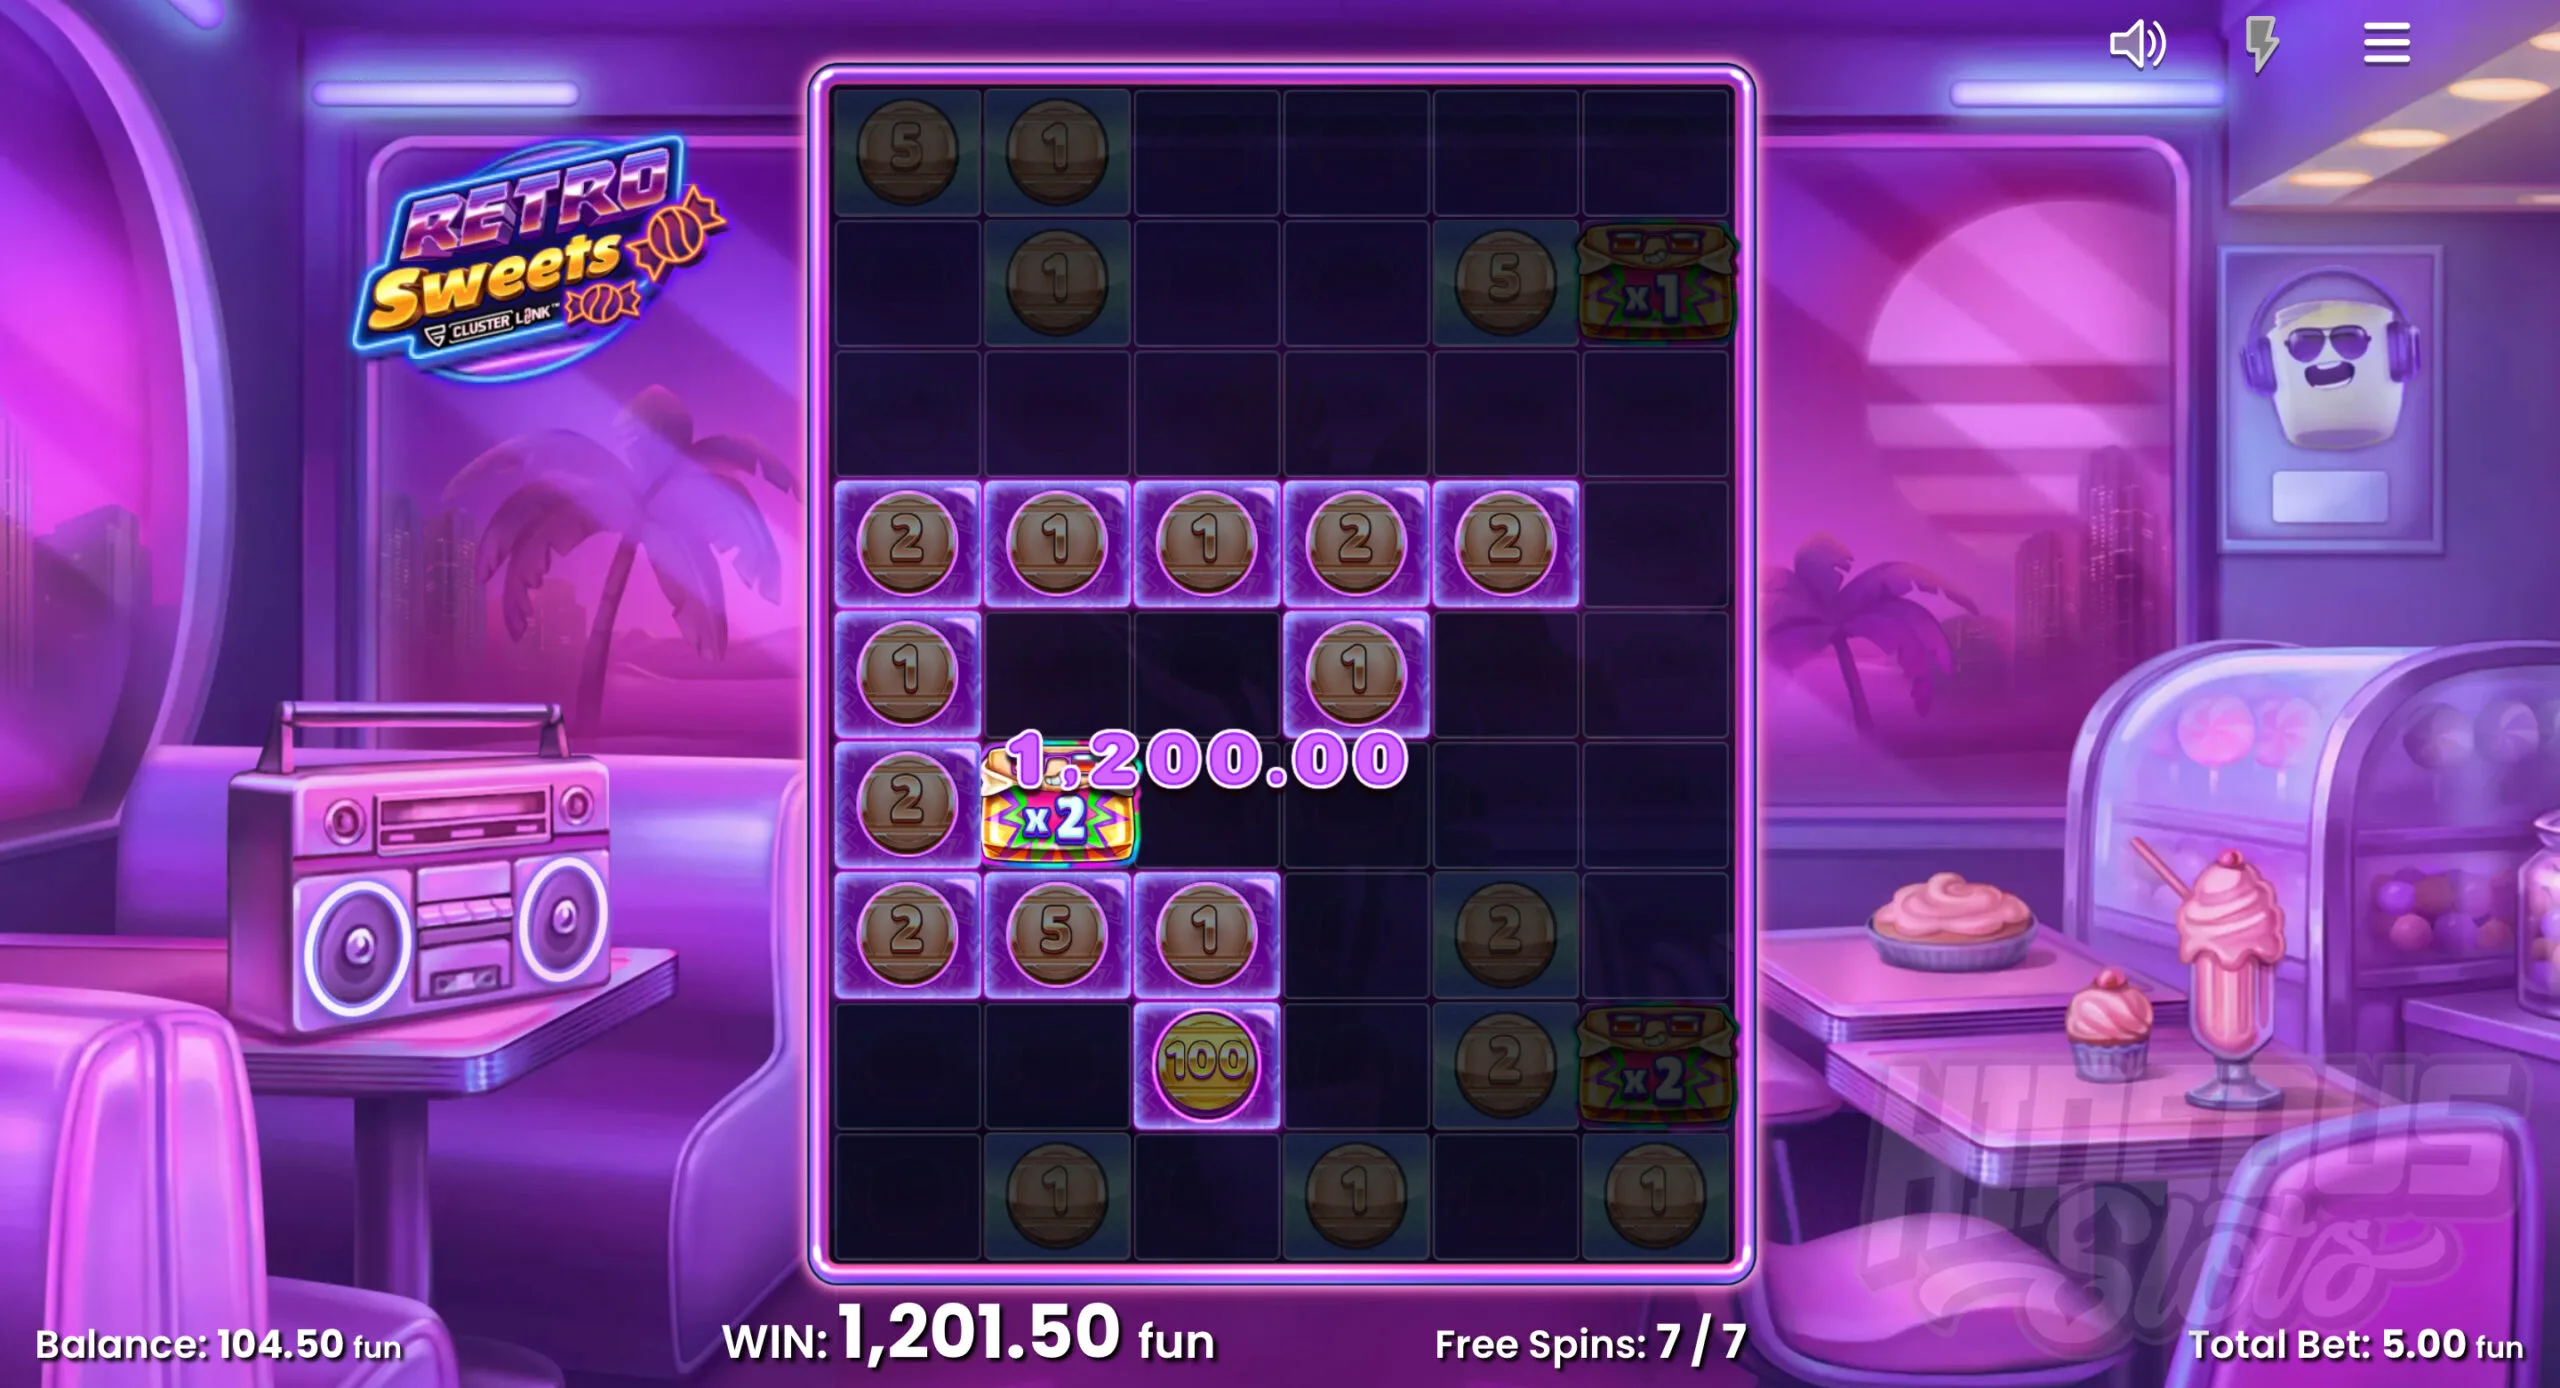 Retro Sweets Free Spins Feature